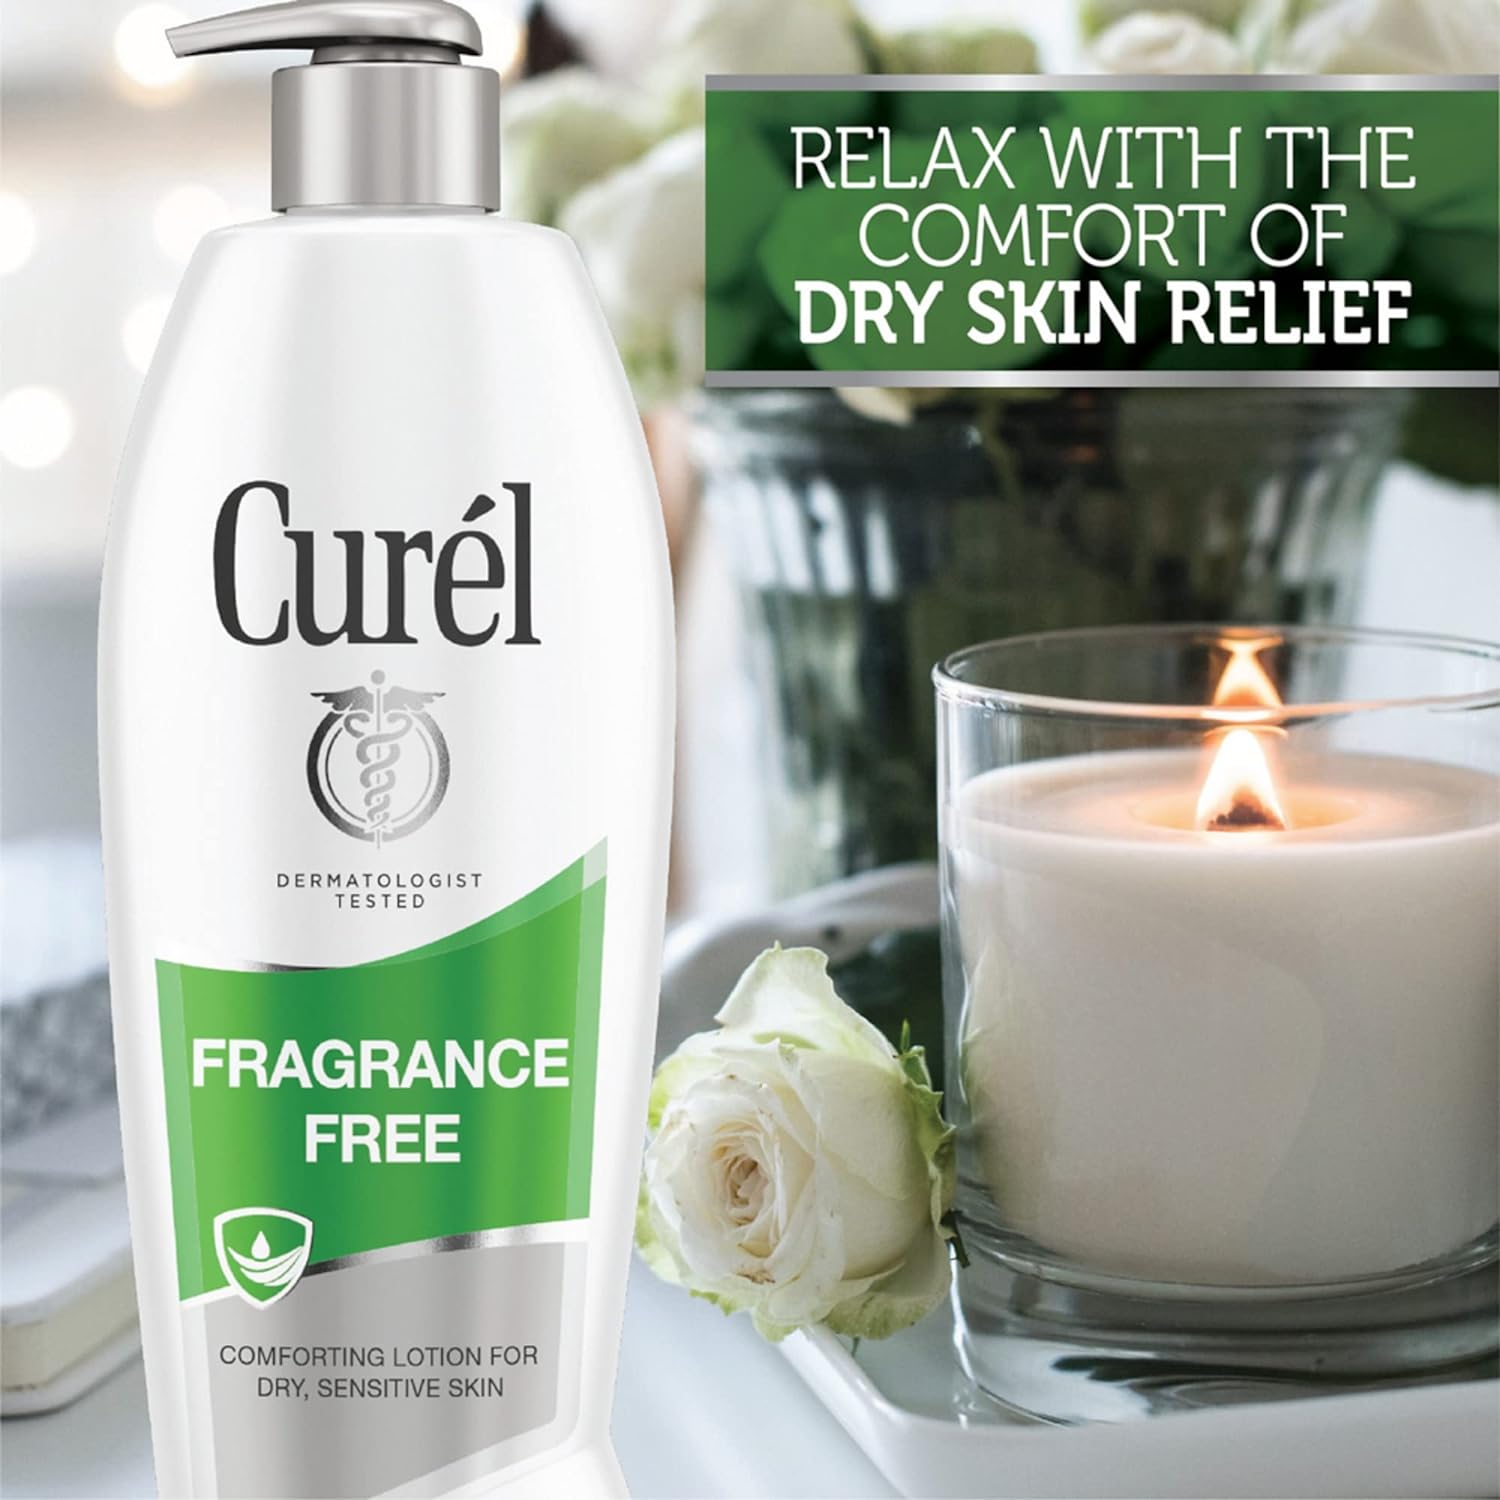 Curel Fragrance Free Body Lotion, Unscented Dry Skin Moisturizer for Sensitive Skin, with Advanced Ceramide Complex, Repairs Moisture Barrier, 13 Ounce (Pack of 3) : Beauty & Personal Care